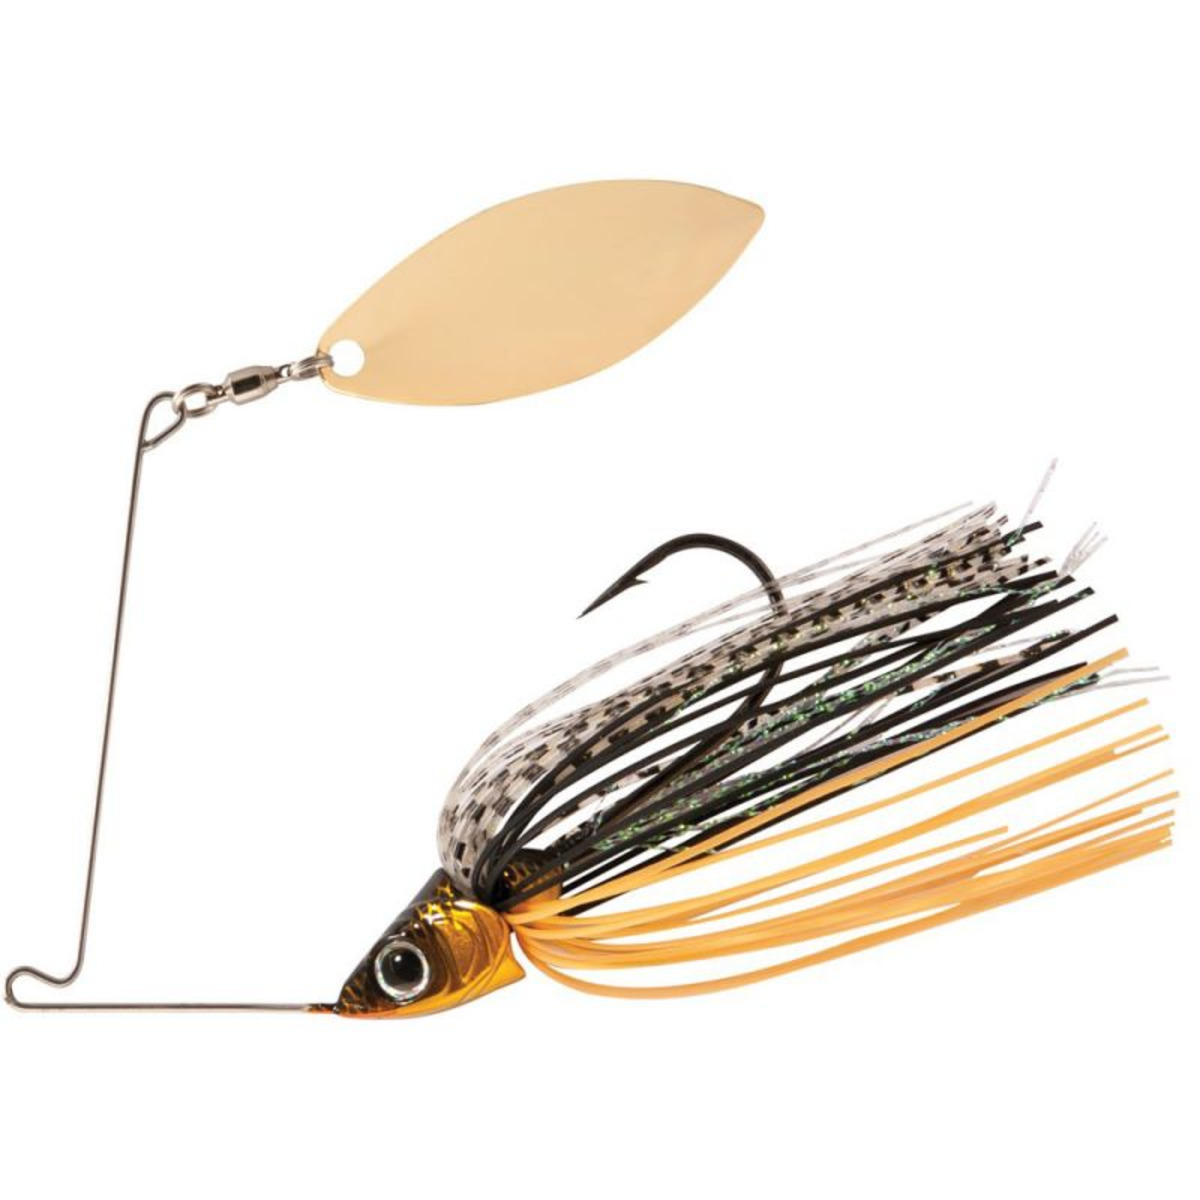 Rapture Sharp Spin Single Willow - 7.0 g - Brownie Shad